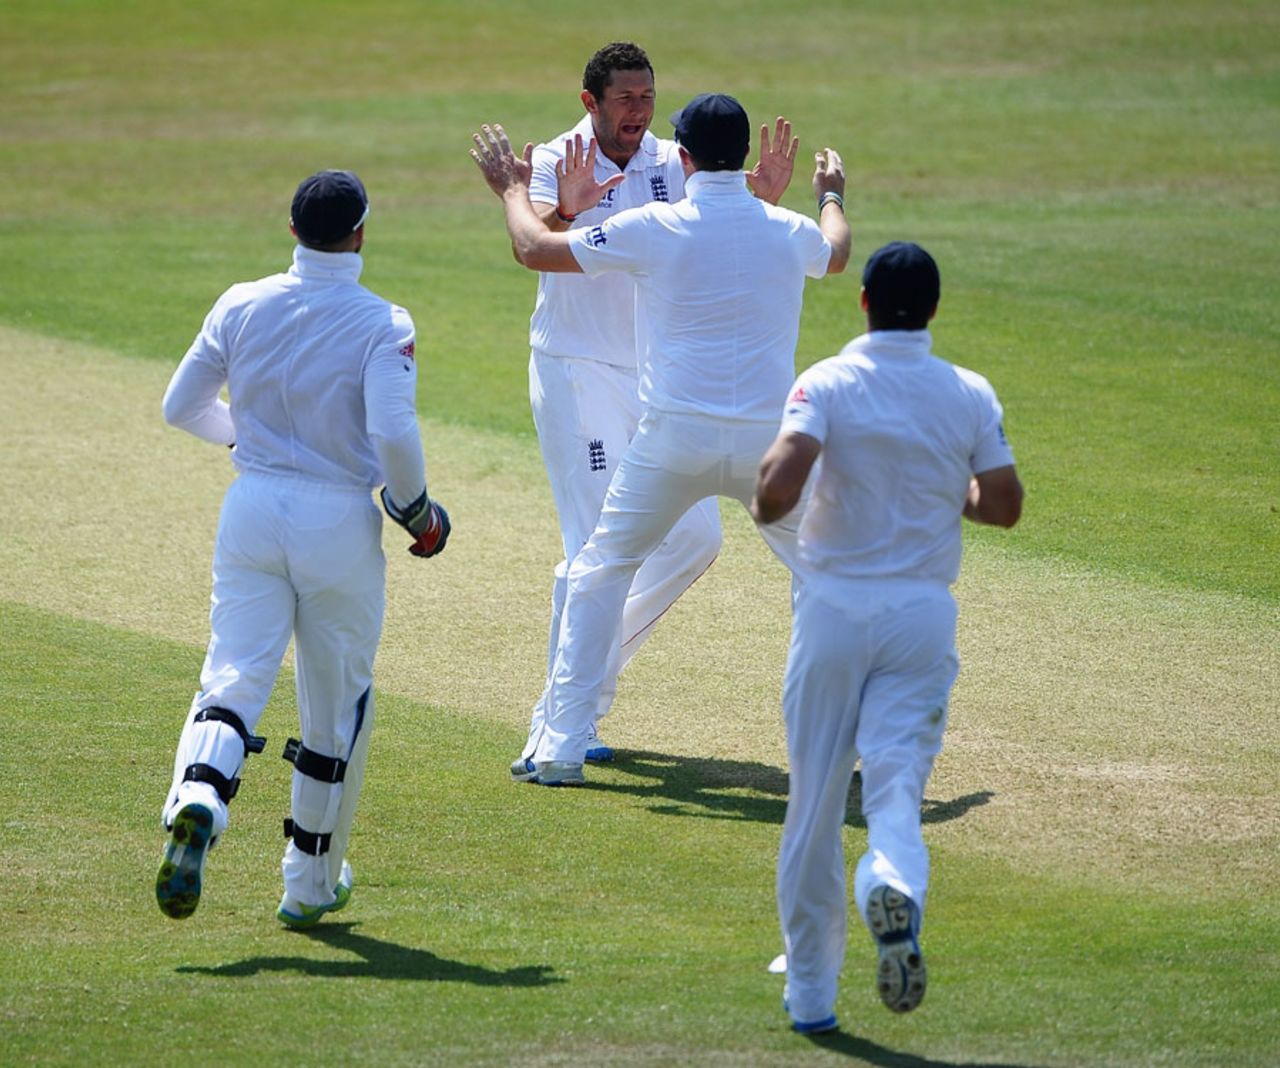 England players celebrate Tim Bresnan's breakthrough, England v West Indies, 2nd Test, Trent Bridge, 4th day, May 28, 2012